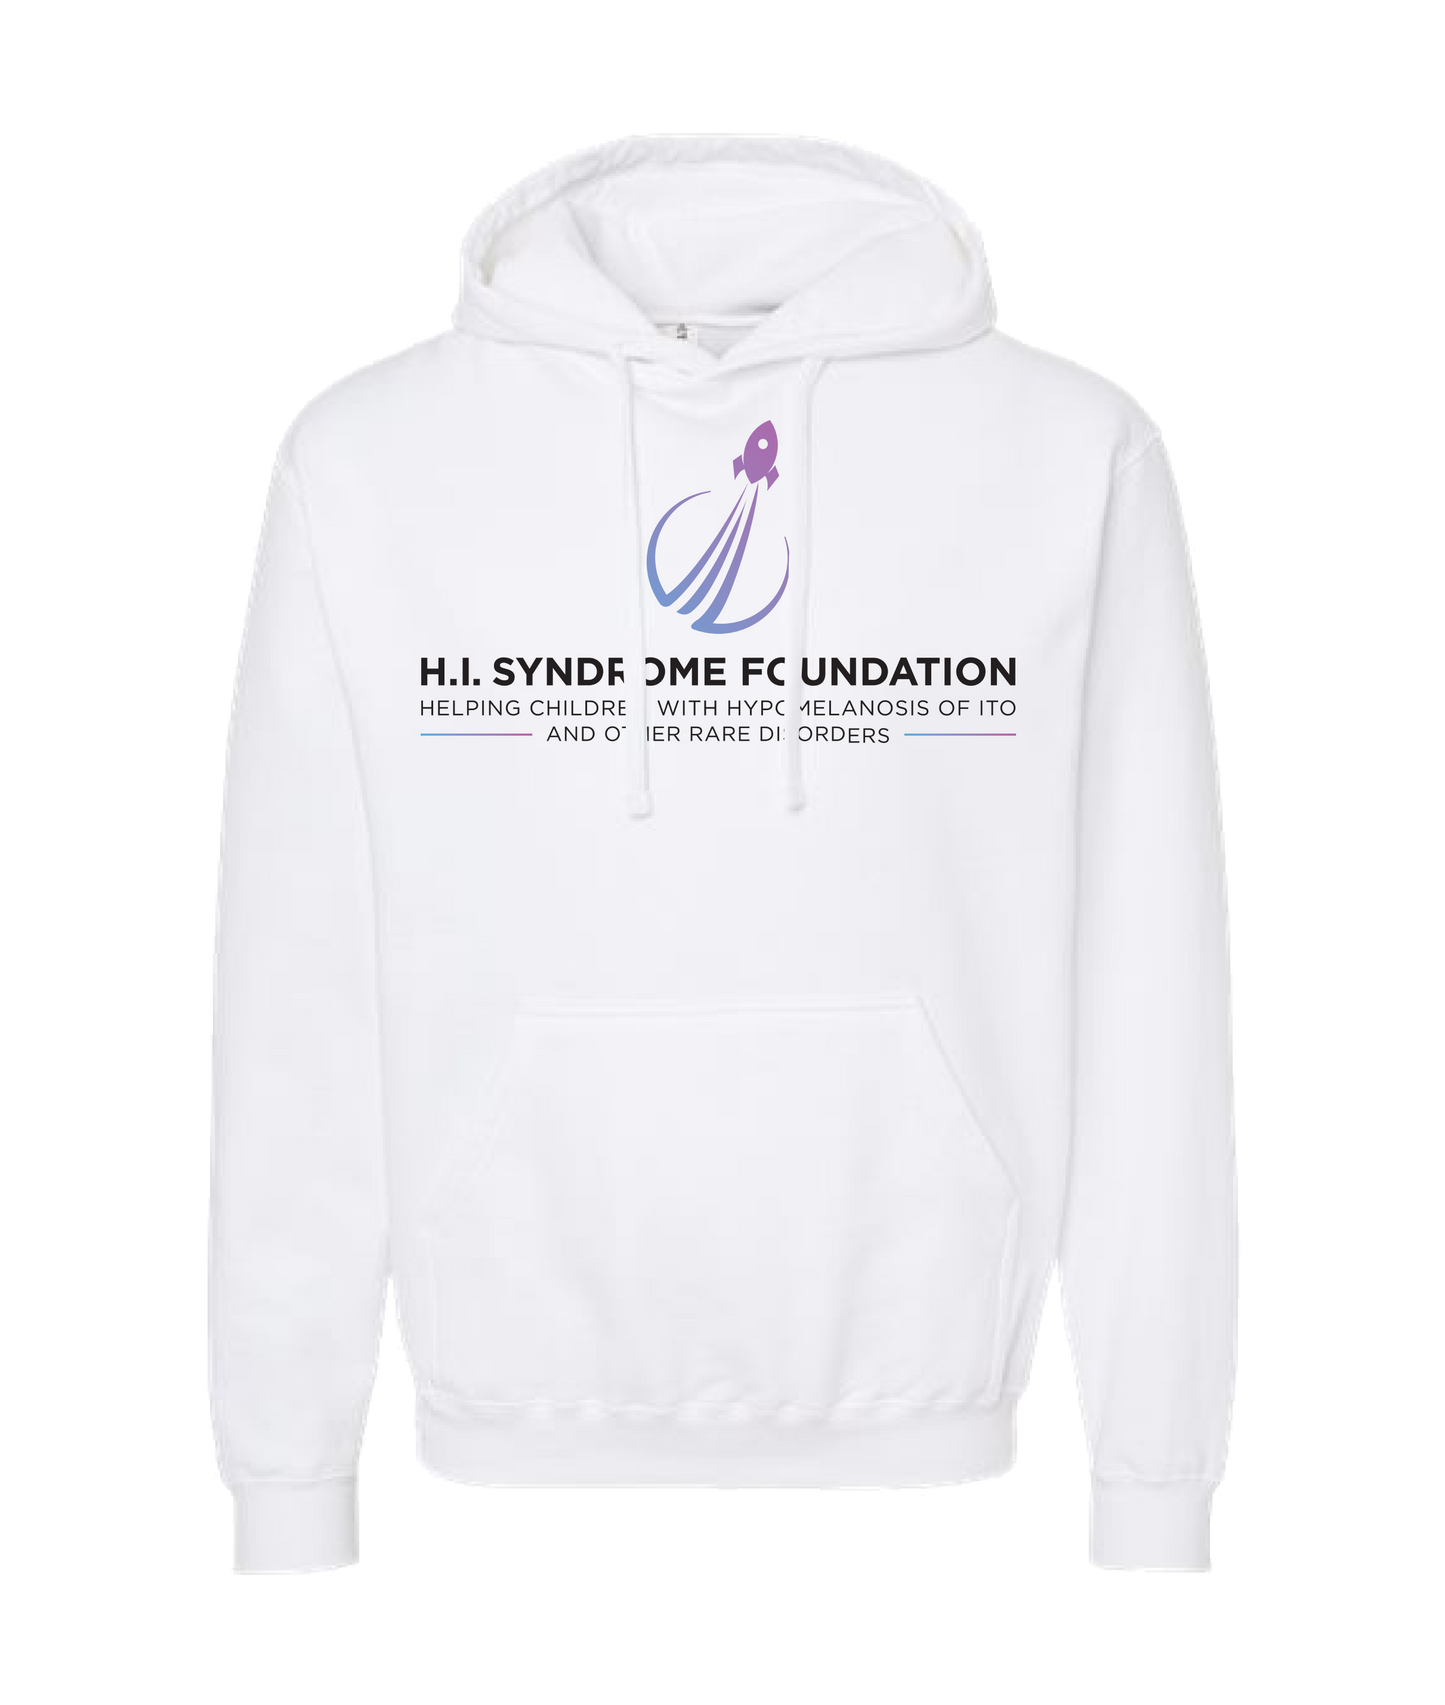 H.I Syndrome Foundation - DESIGN 1 - White Hoodie